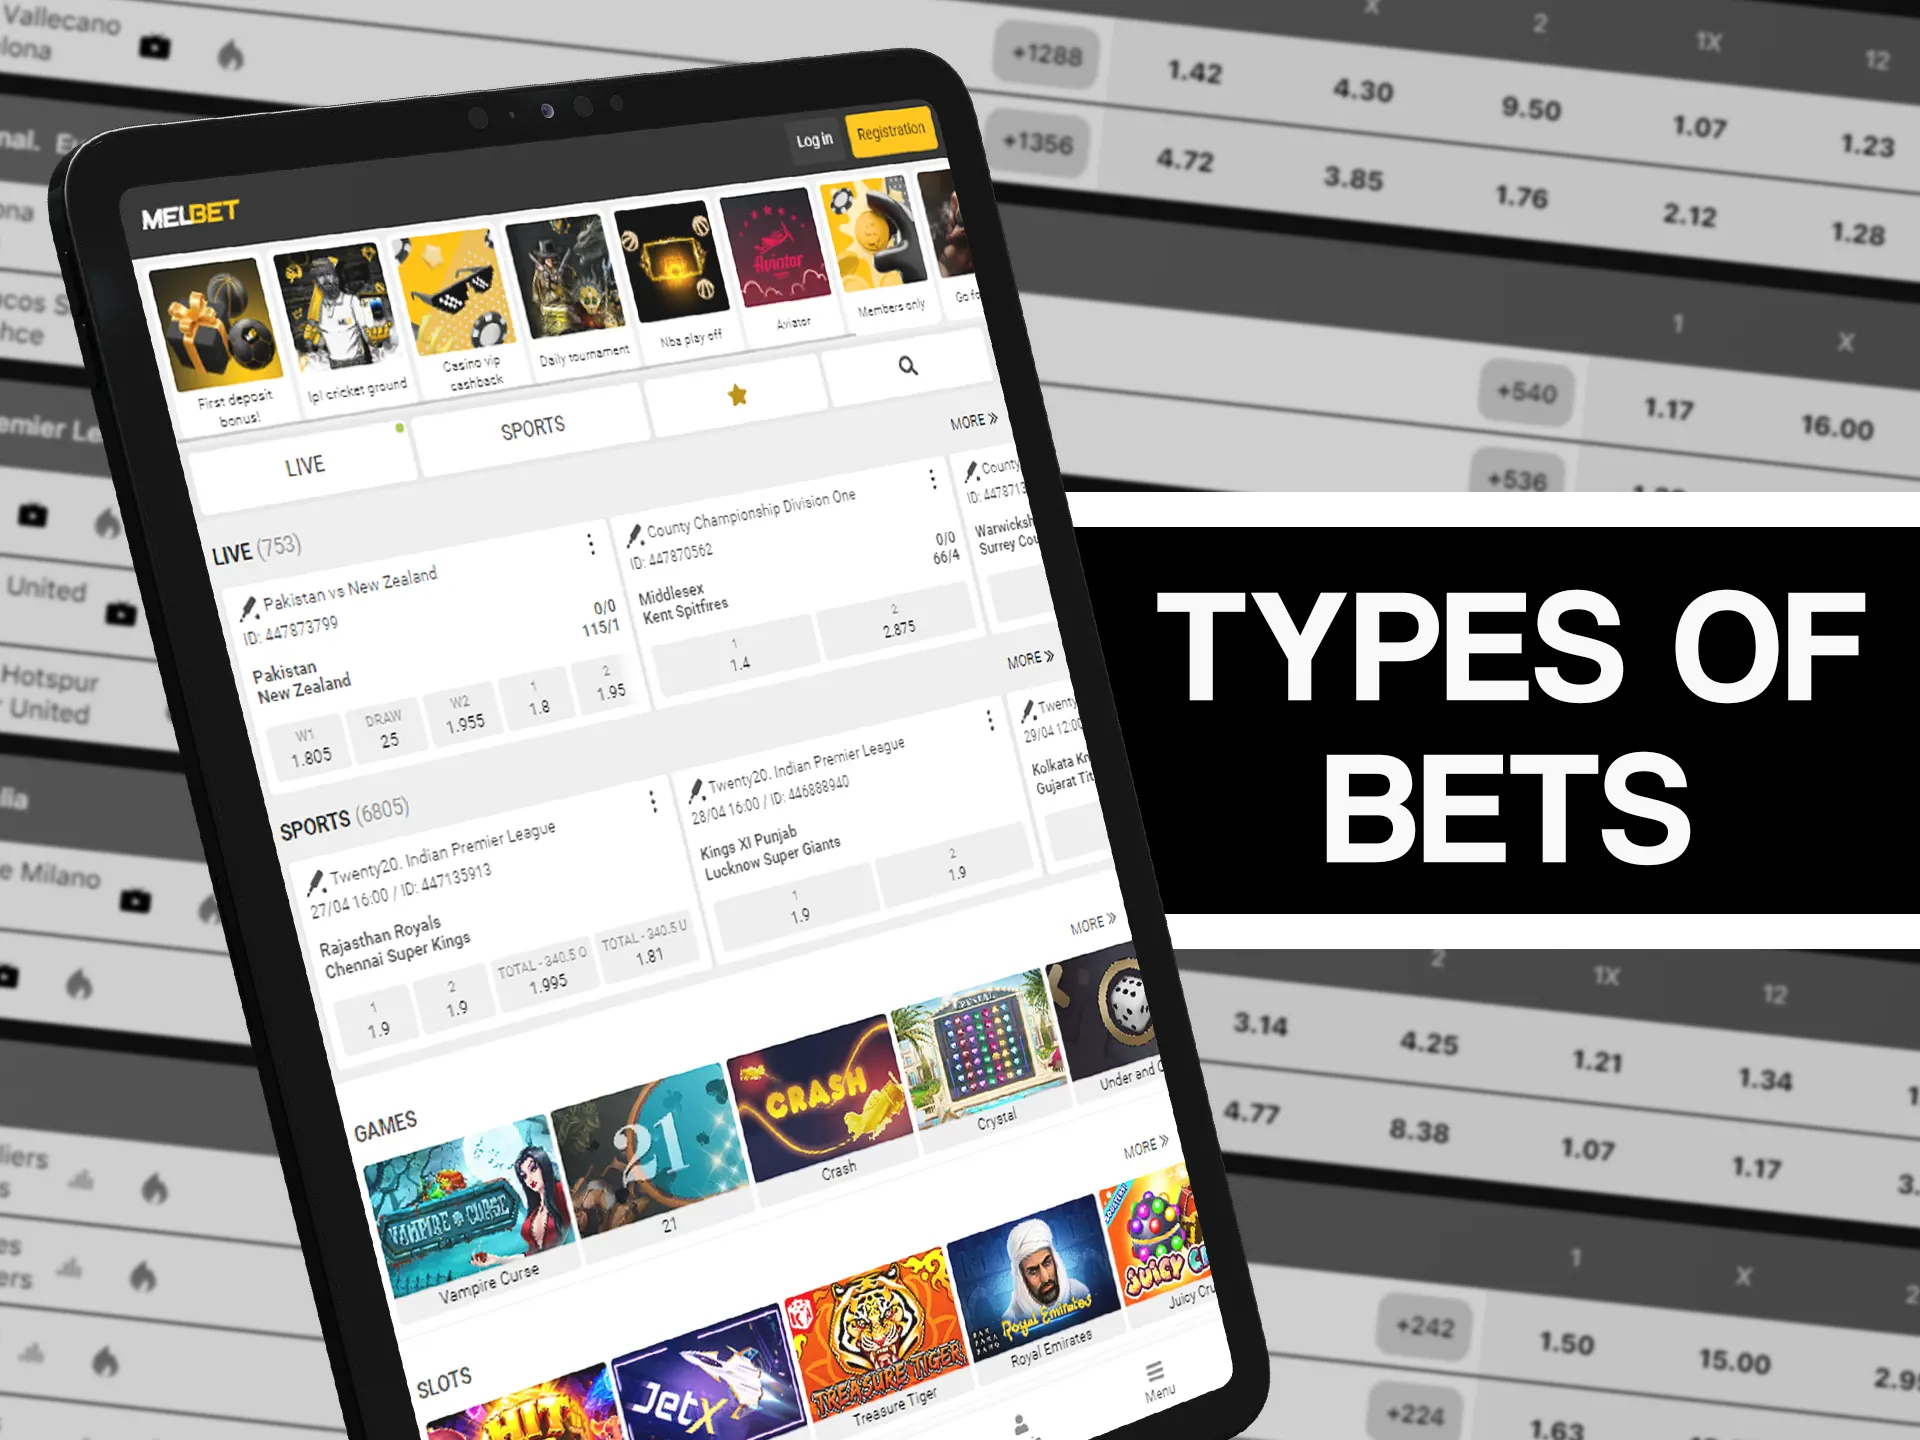 Learn more about different types of bets.